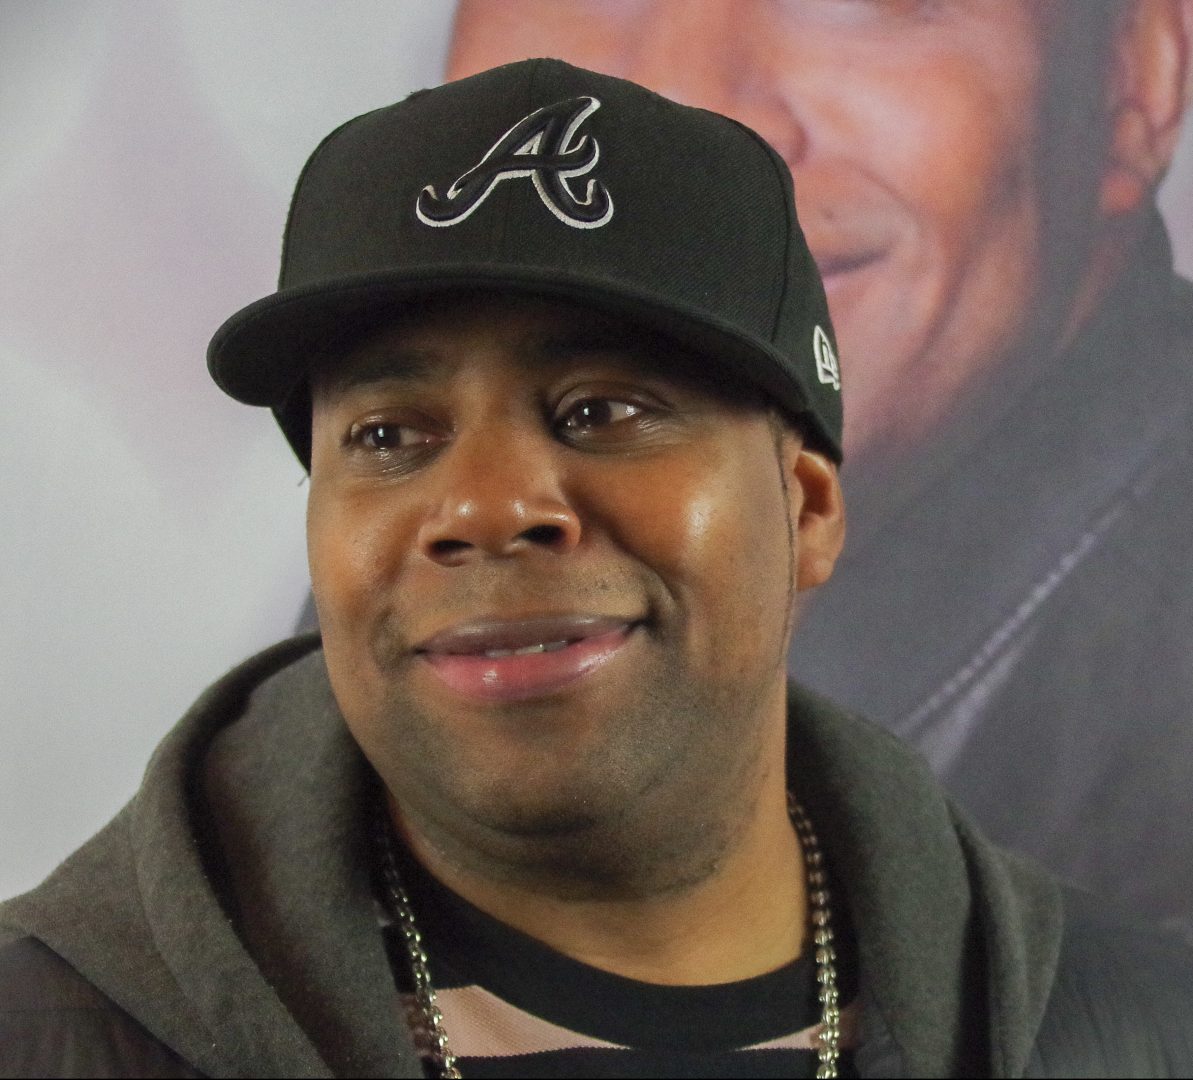 Kenan Thompson makes room for new comedic talent in Chicago